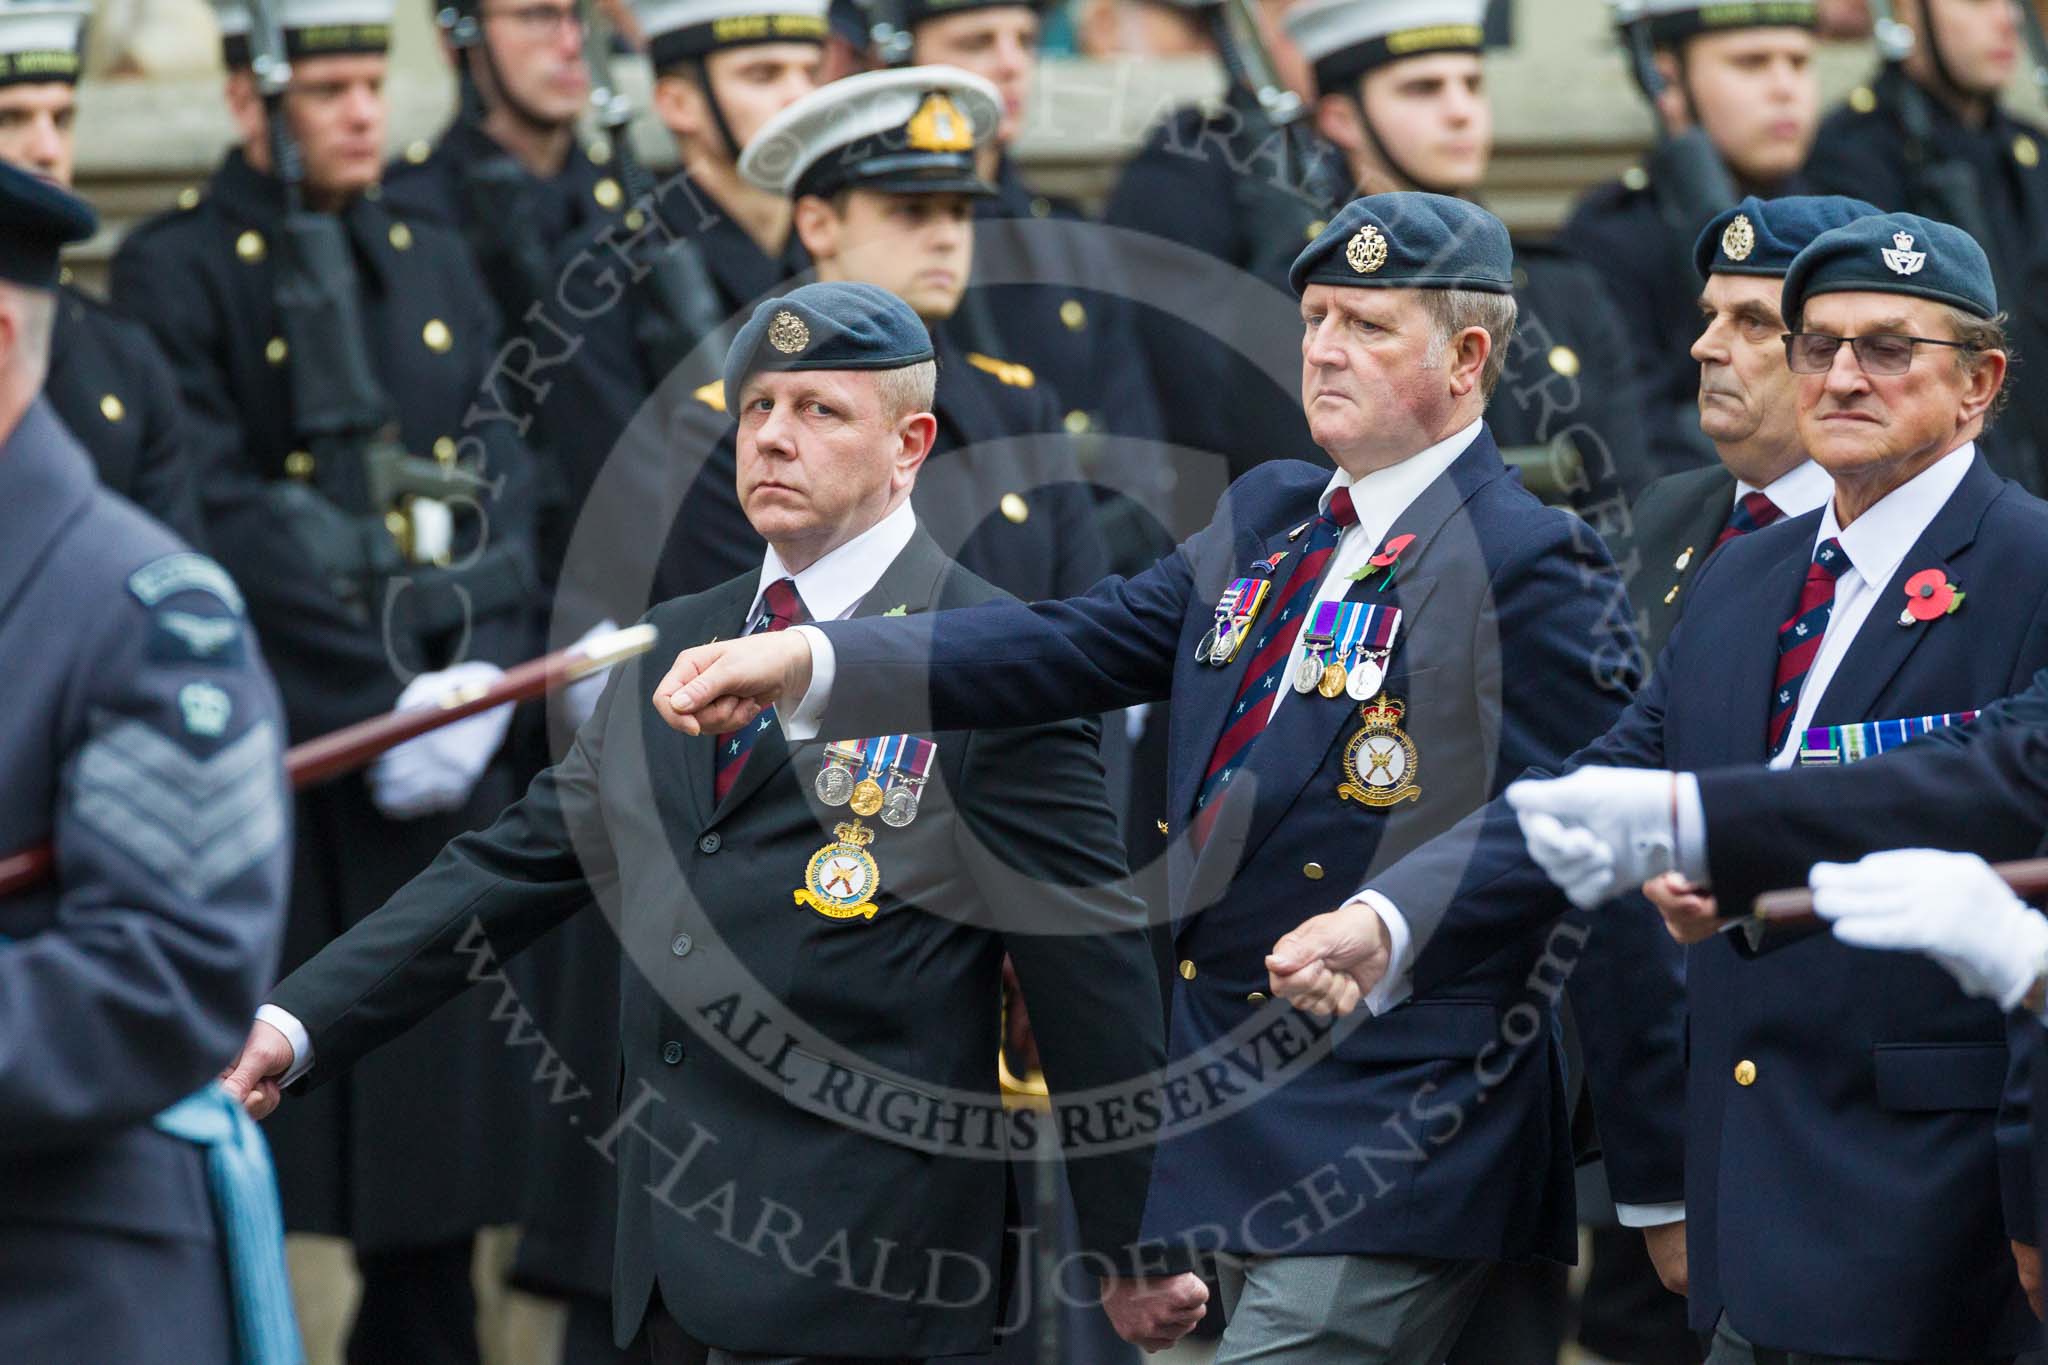 Remembrance Sunday at the Cenotaph 2015: C2, Royal Air Force Regiment Association.
Cenotaph, Whitehall, London SW1,
London,
Greater London,
United Kingdom,
on 08 November 2015 at 11:47, image #426